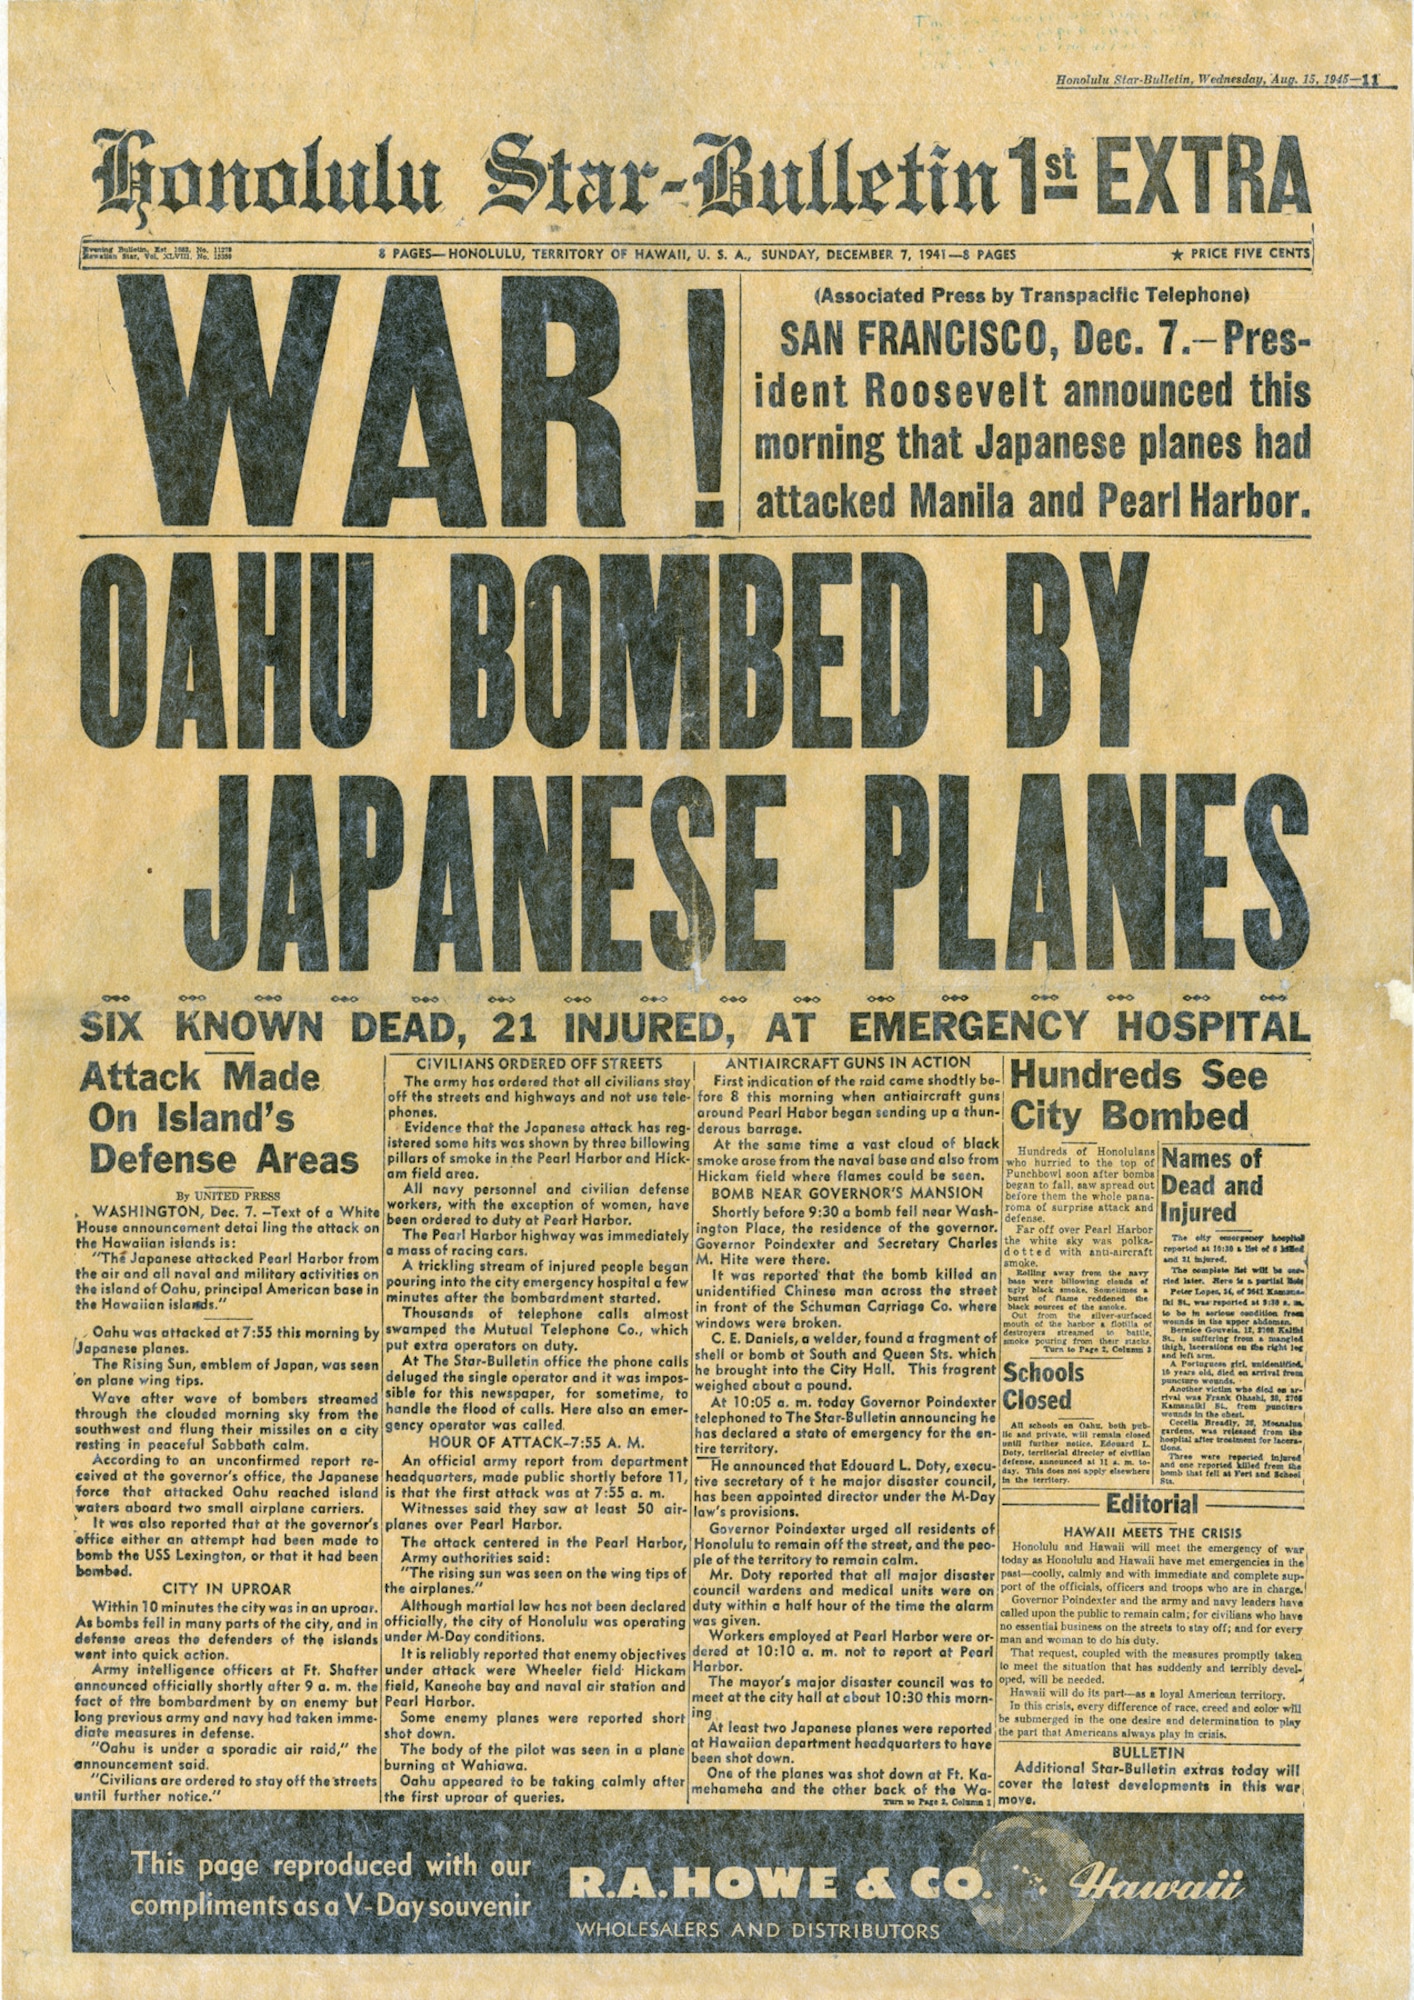 Honolulu Star-Bulletin following the attack on Pearl Harbor. (U.S. Air Force photo)